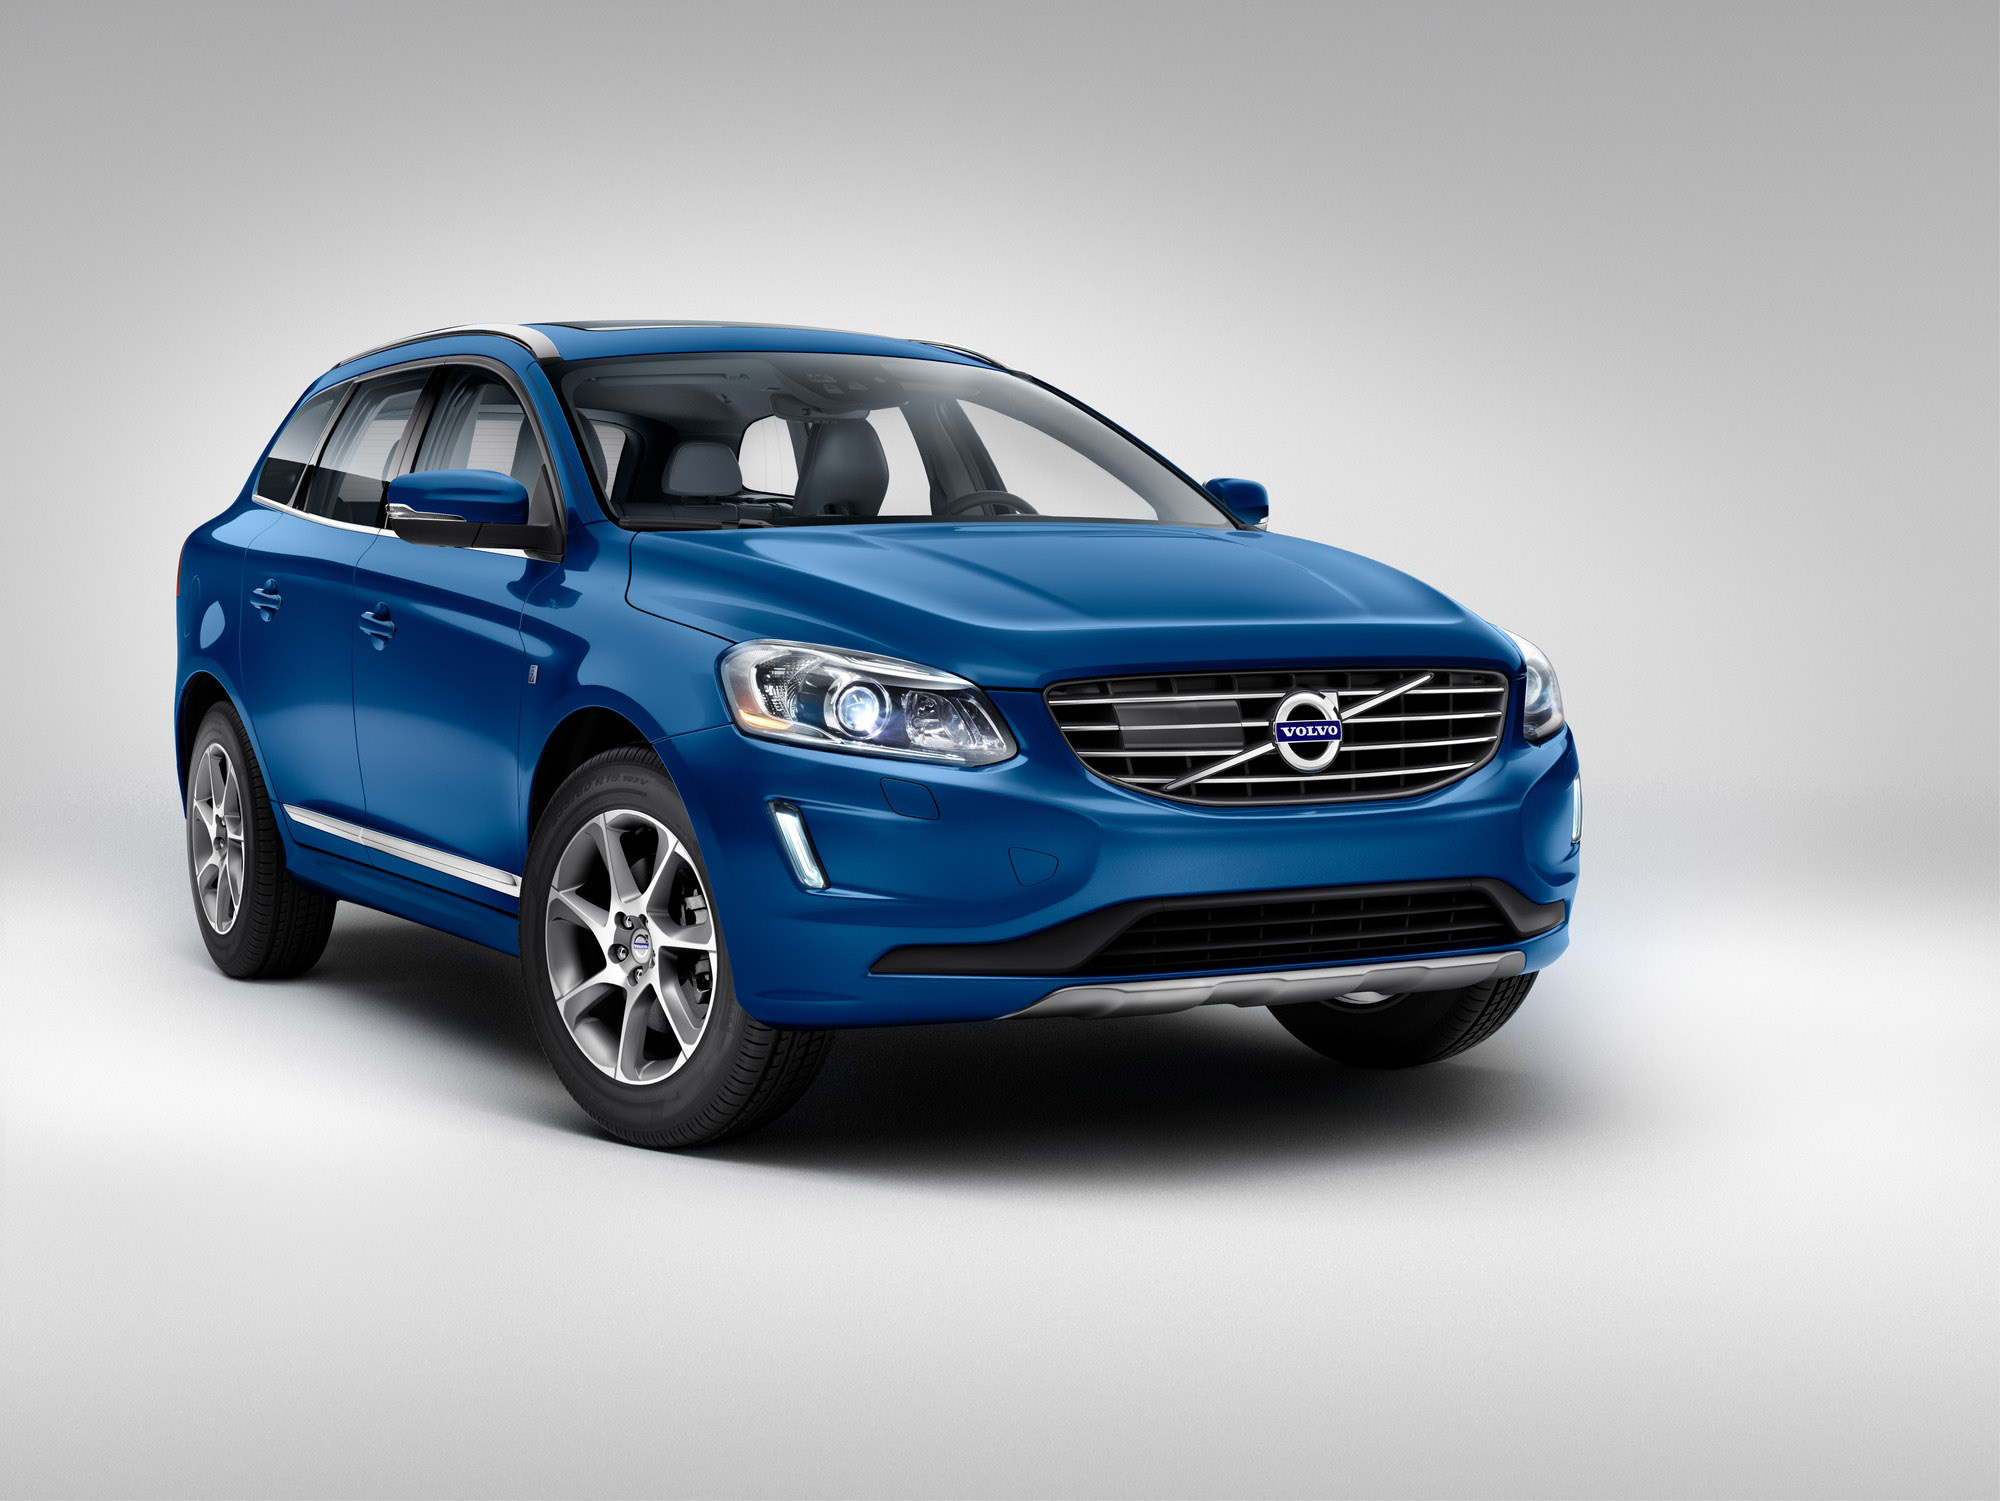 Volvo Ocean Race XC60 Limited Edition